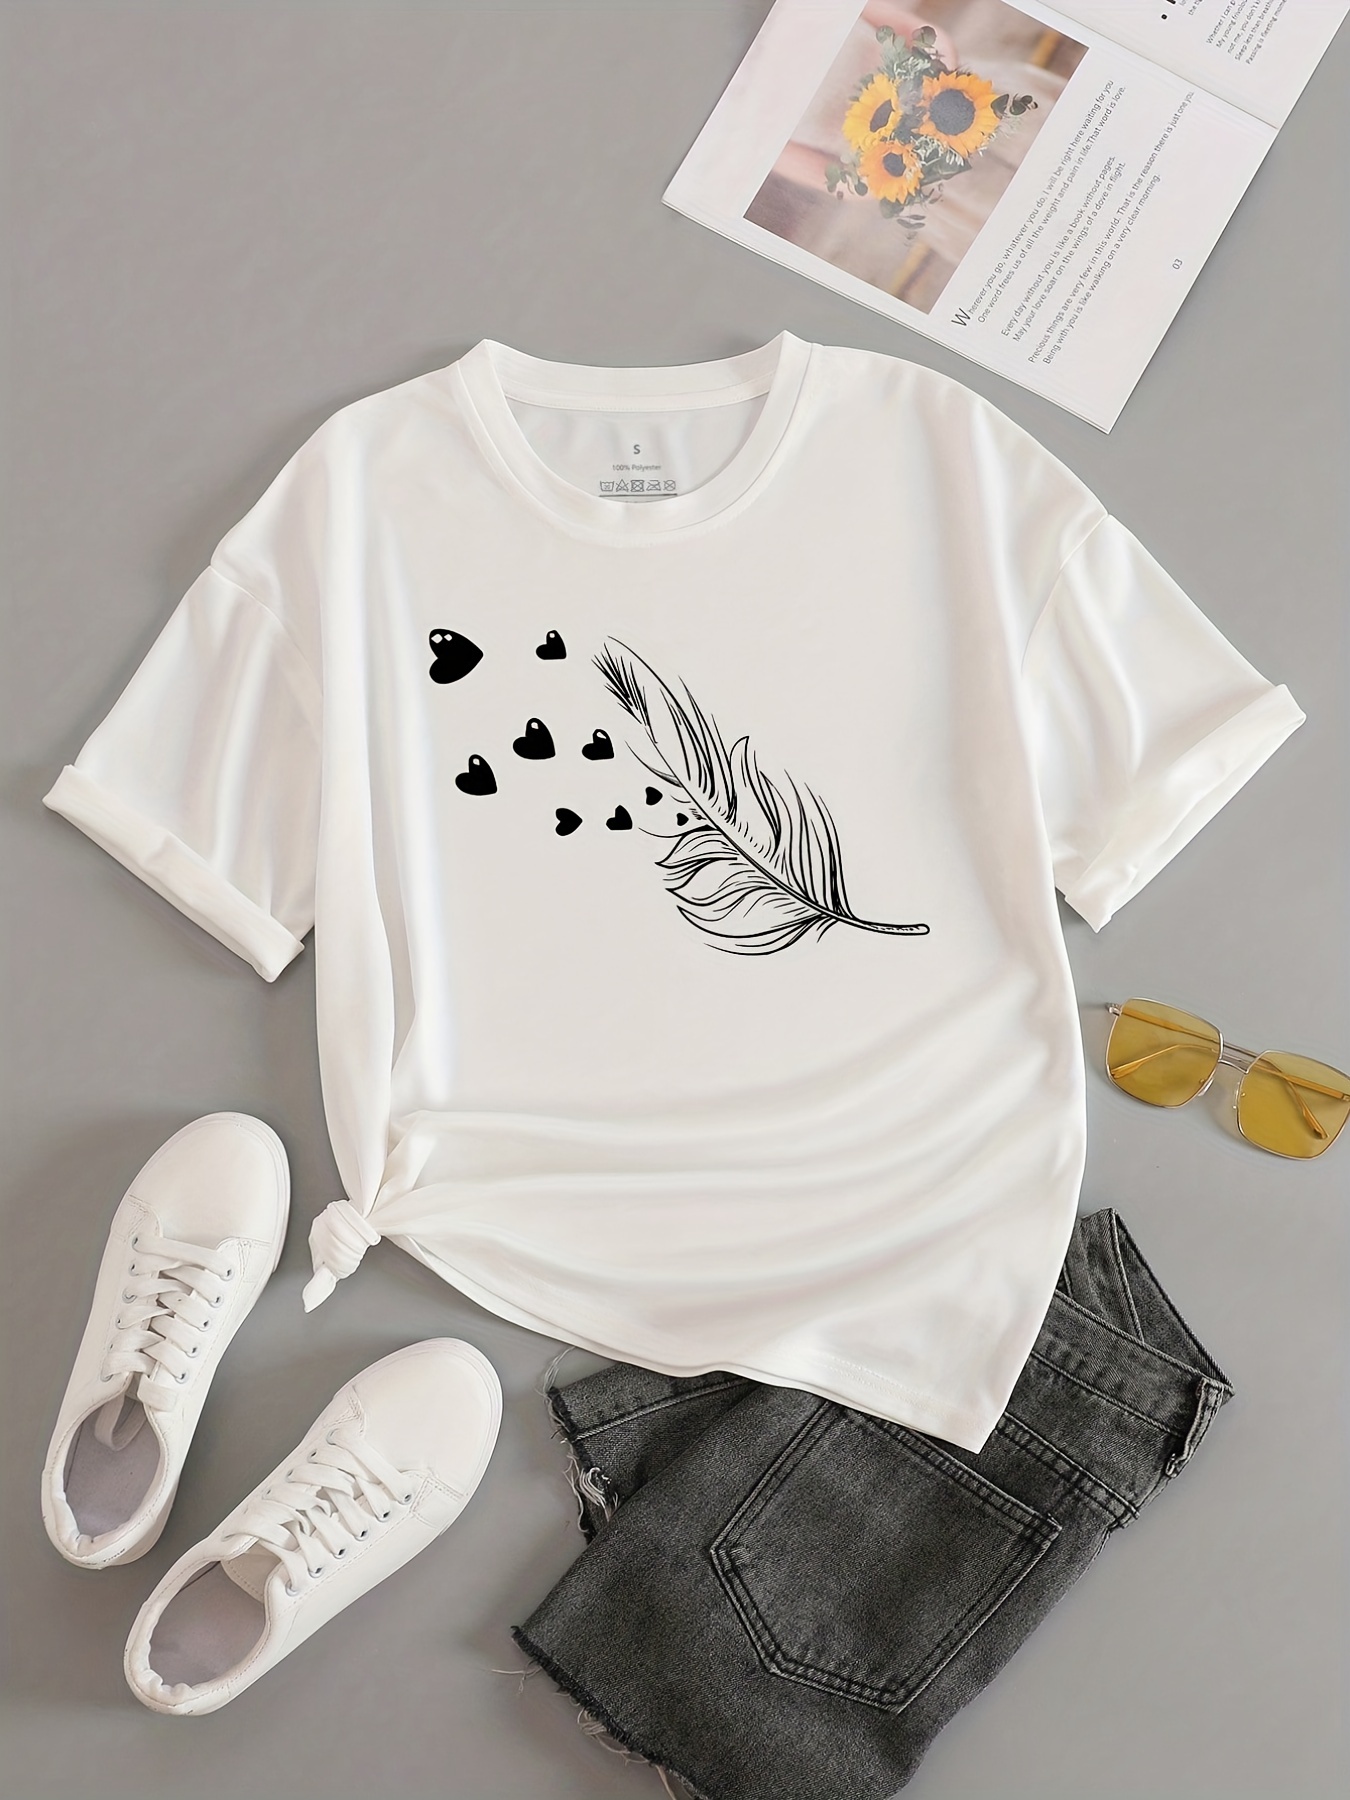 Solid Color Heart And Feather Line Drawing Print Short-sleeved T-shirt,  Sports Fitness Yoga Running Top, Women's Clothing